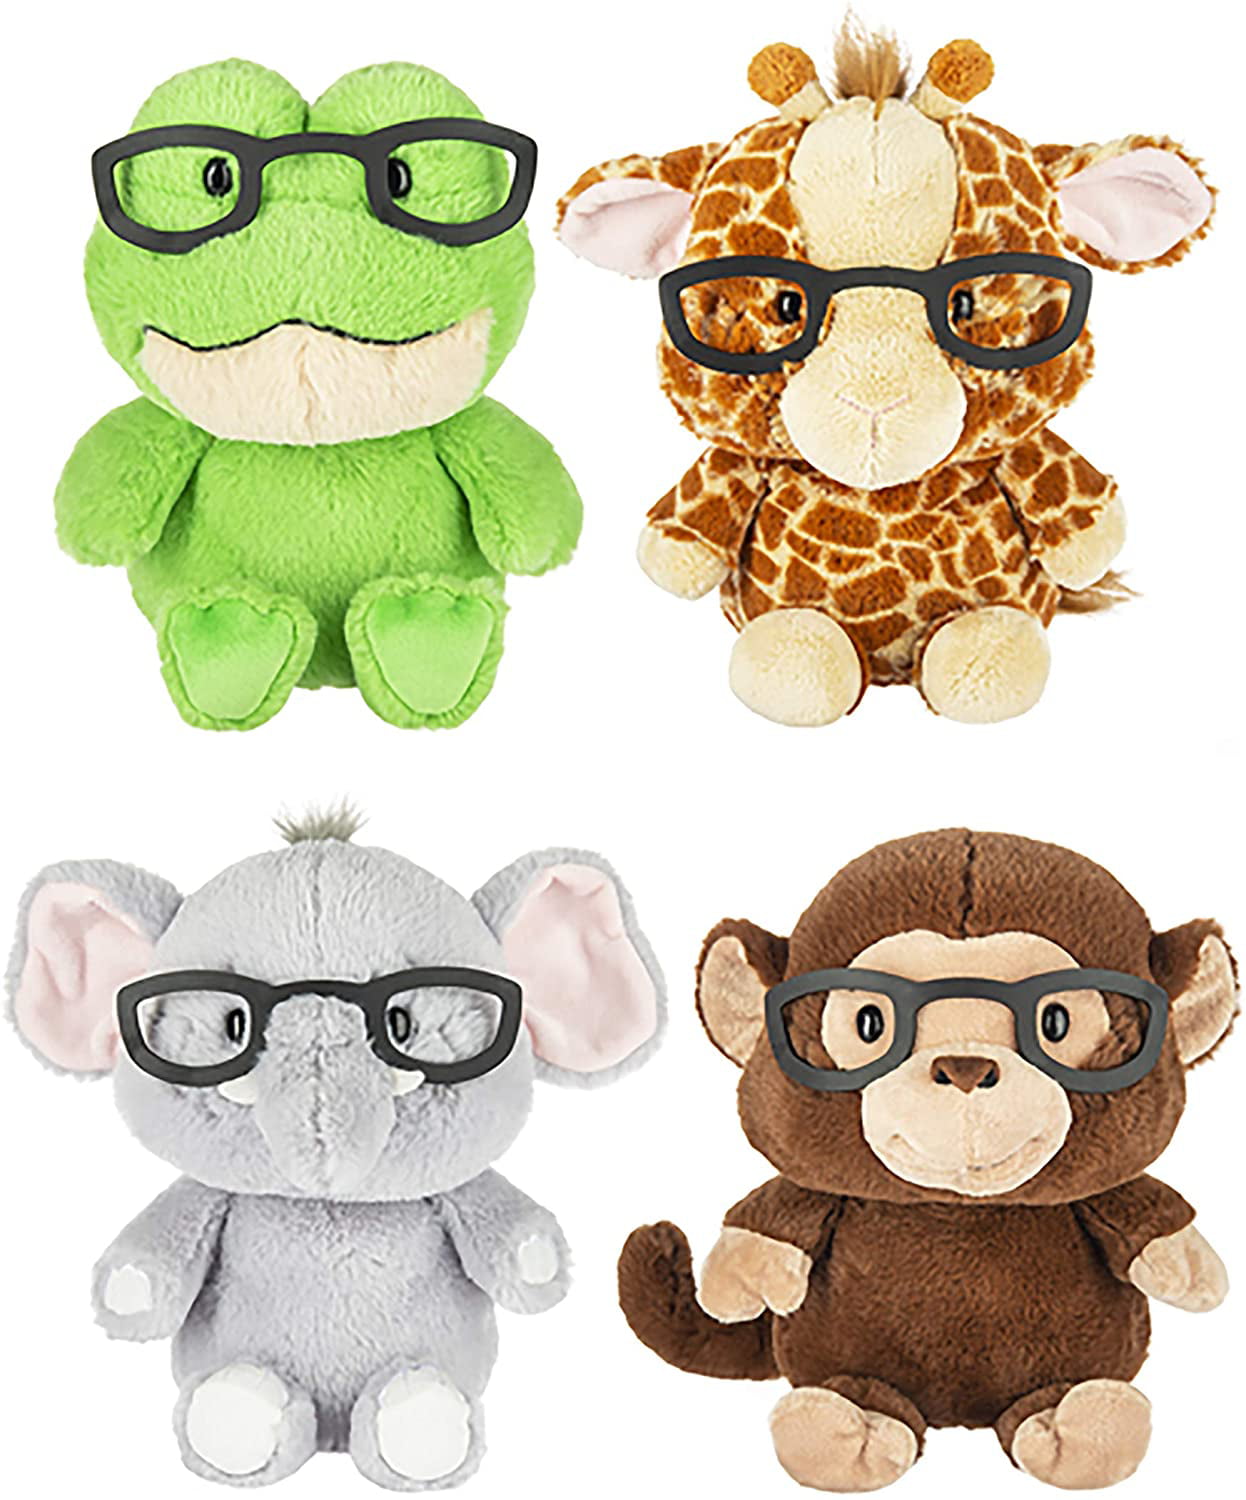 GANZ Baby Plush Stuffed Animal 11 Inches Spectimals Puppy With Glasses for sale online 